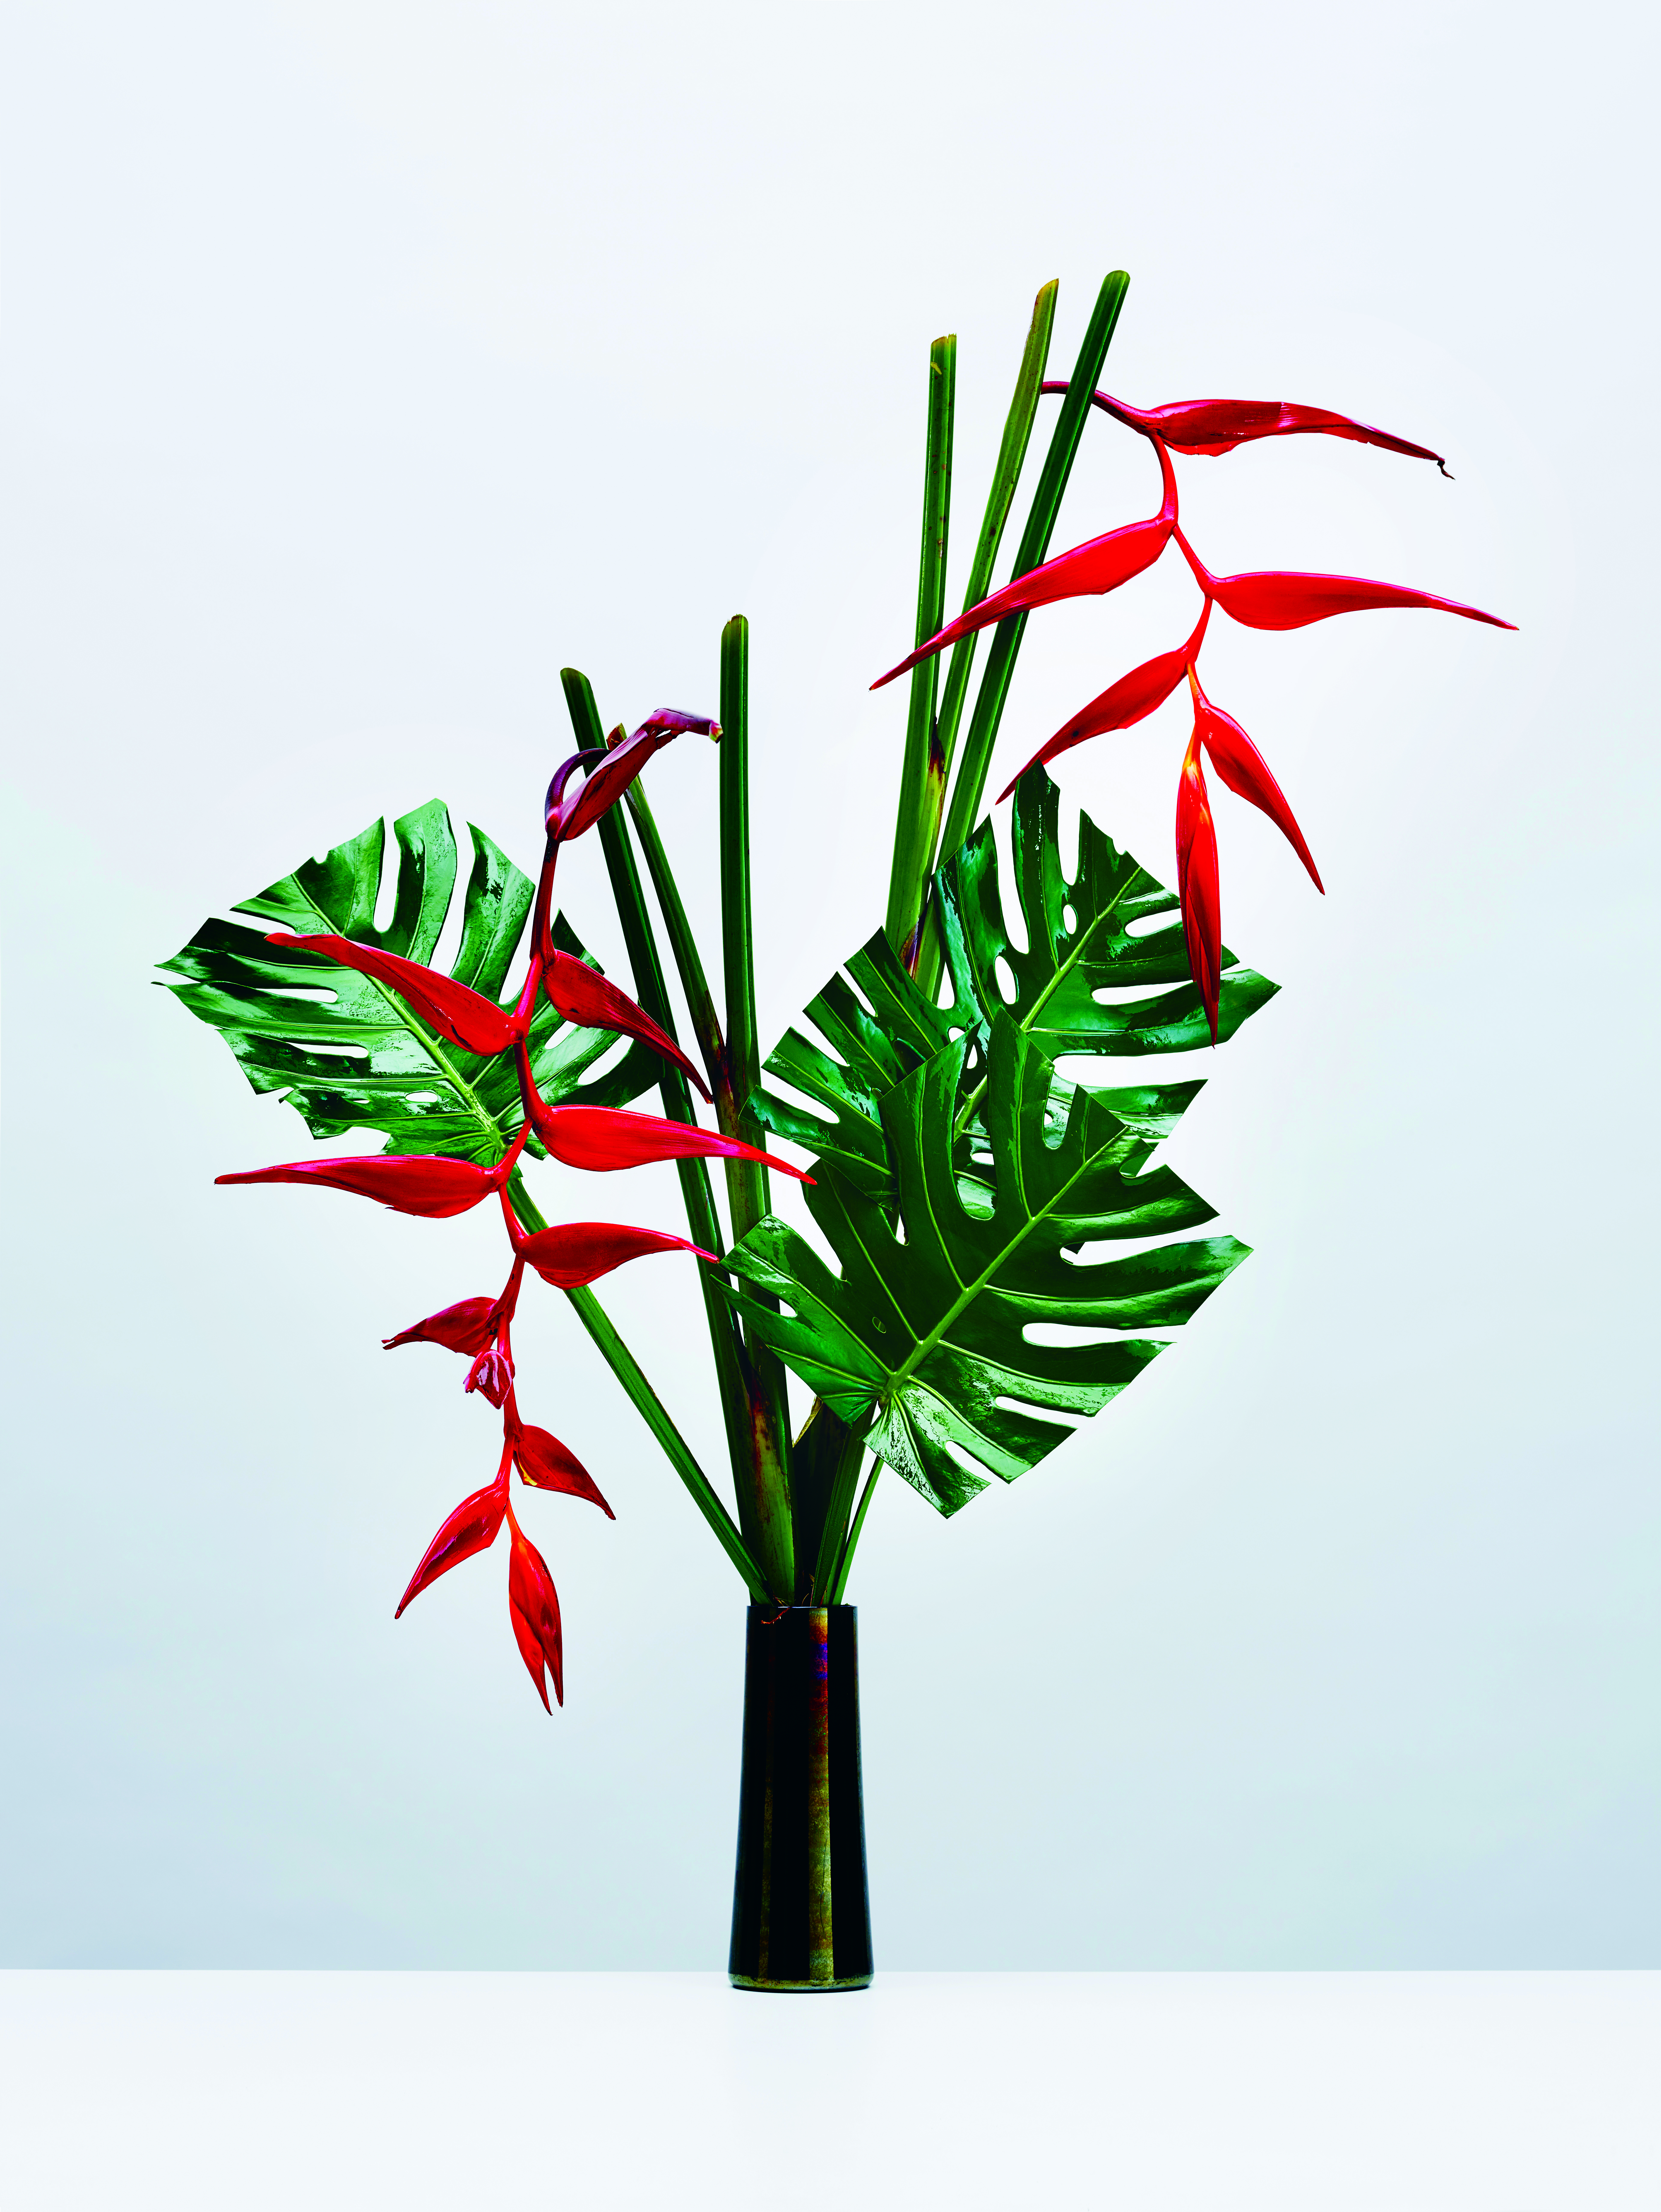 Metaflora (Marissa Competello, New York): Snipped leaves of Swiss cheese plant (Monstera d